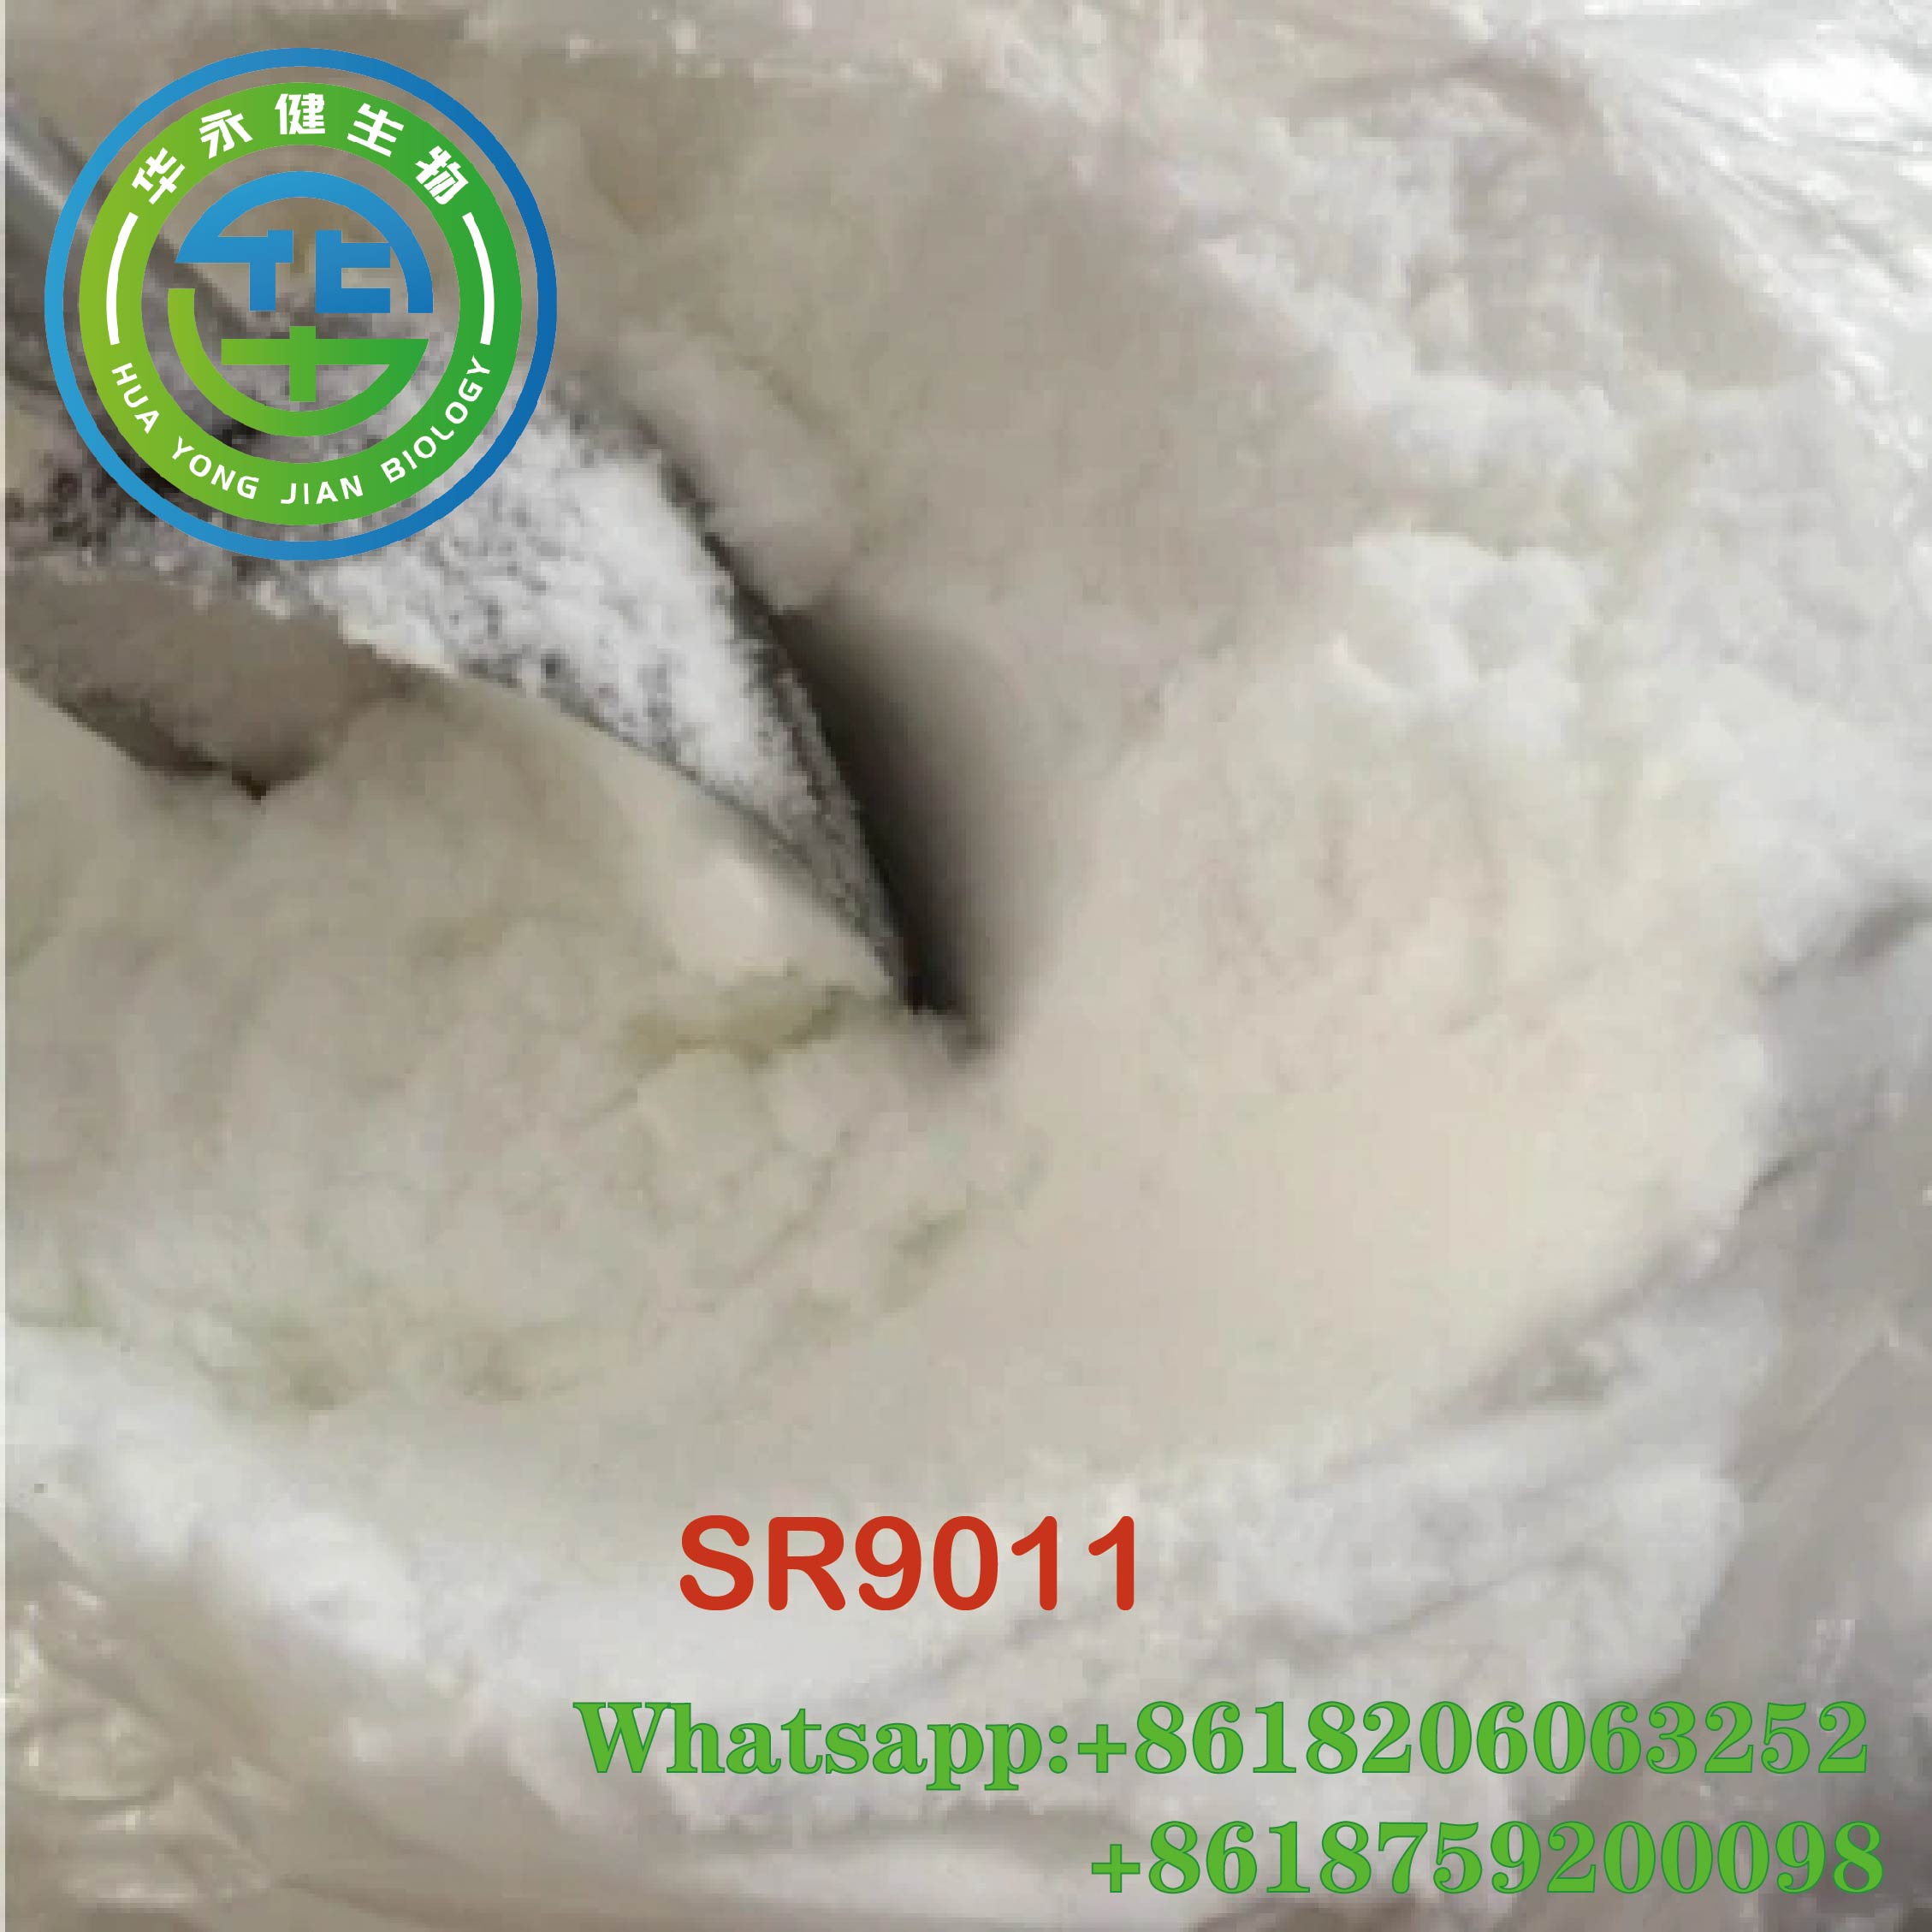 Sarms Powder SR9011 for Fitness Safe 100% Delivery Guarantee Factory Price 